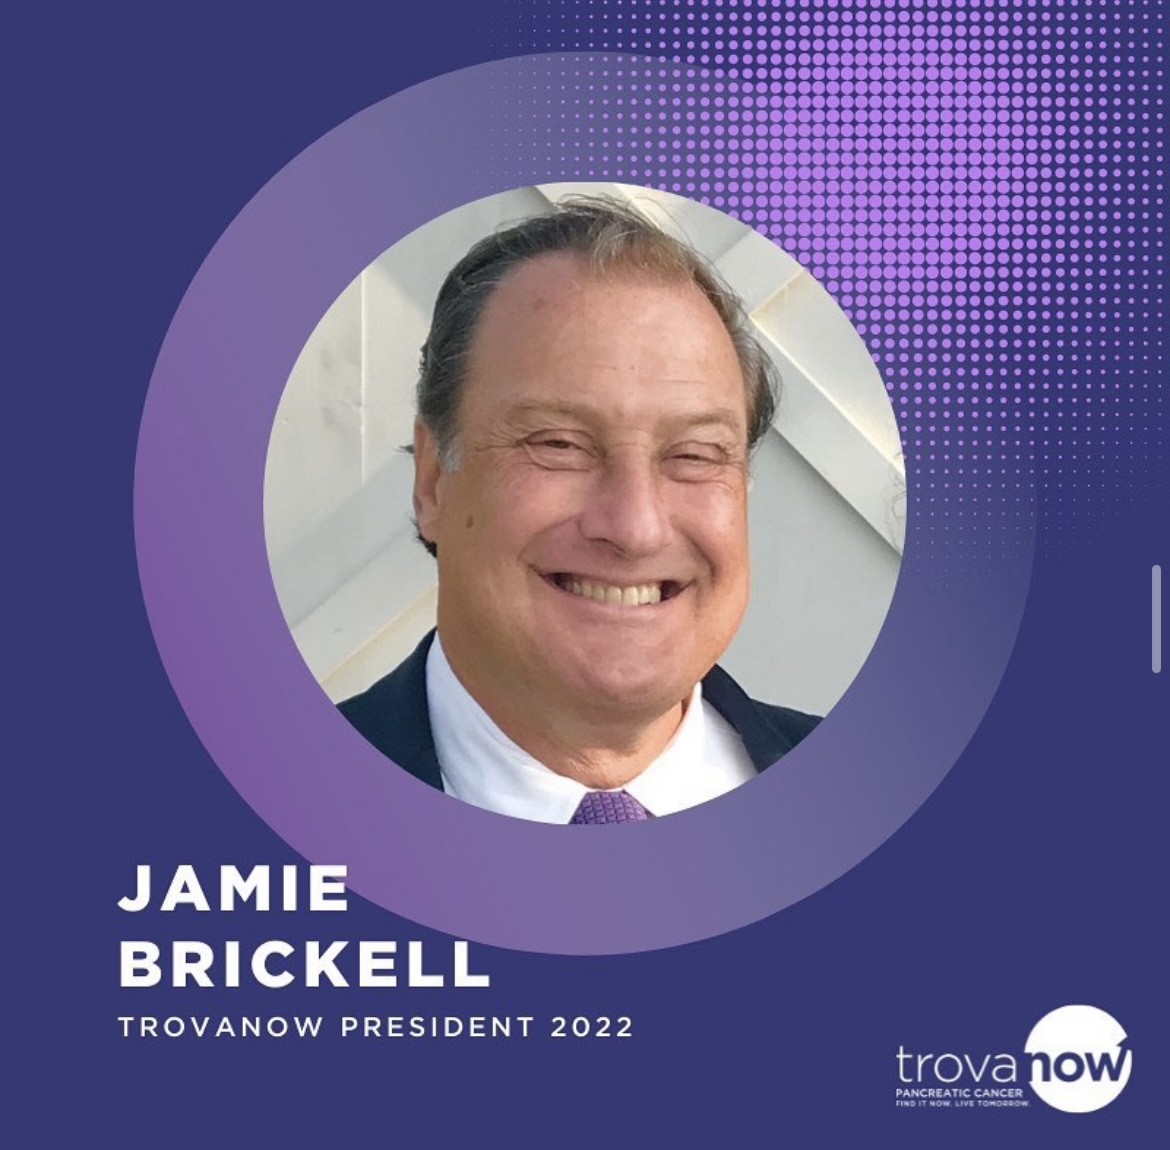 We’re excited to announce Jamie Brickell as TrovaNOW’s new President! 

Learn more about our TrovaNOW’s President and get involved with #trovanow at trovanow.com
#cancerresearch #awareness #health